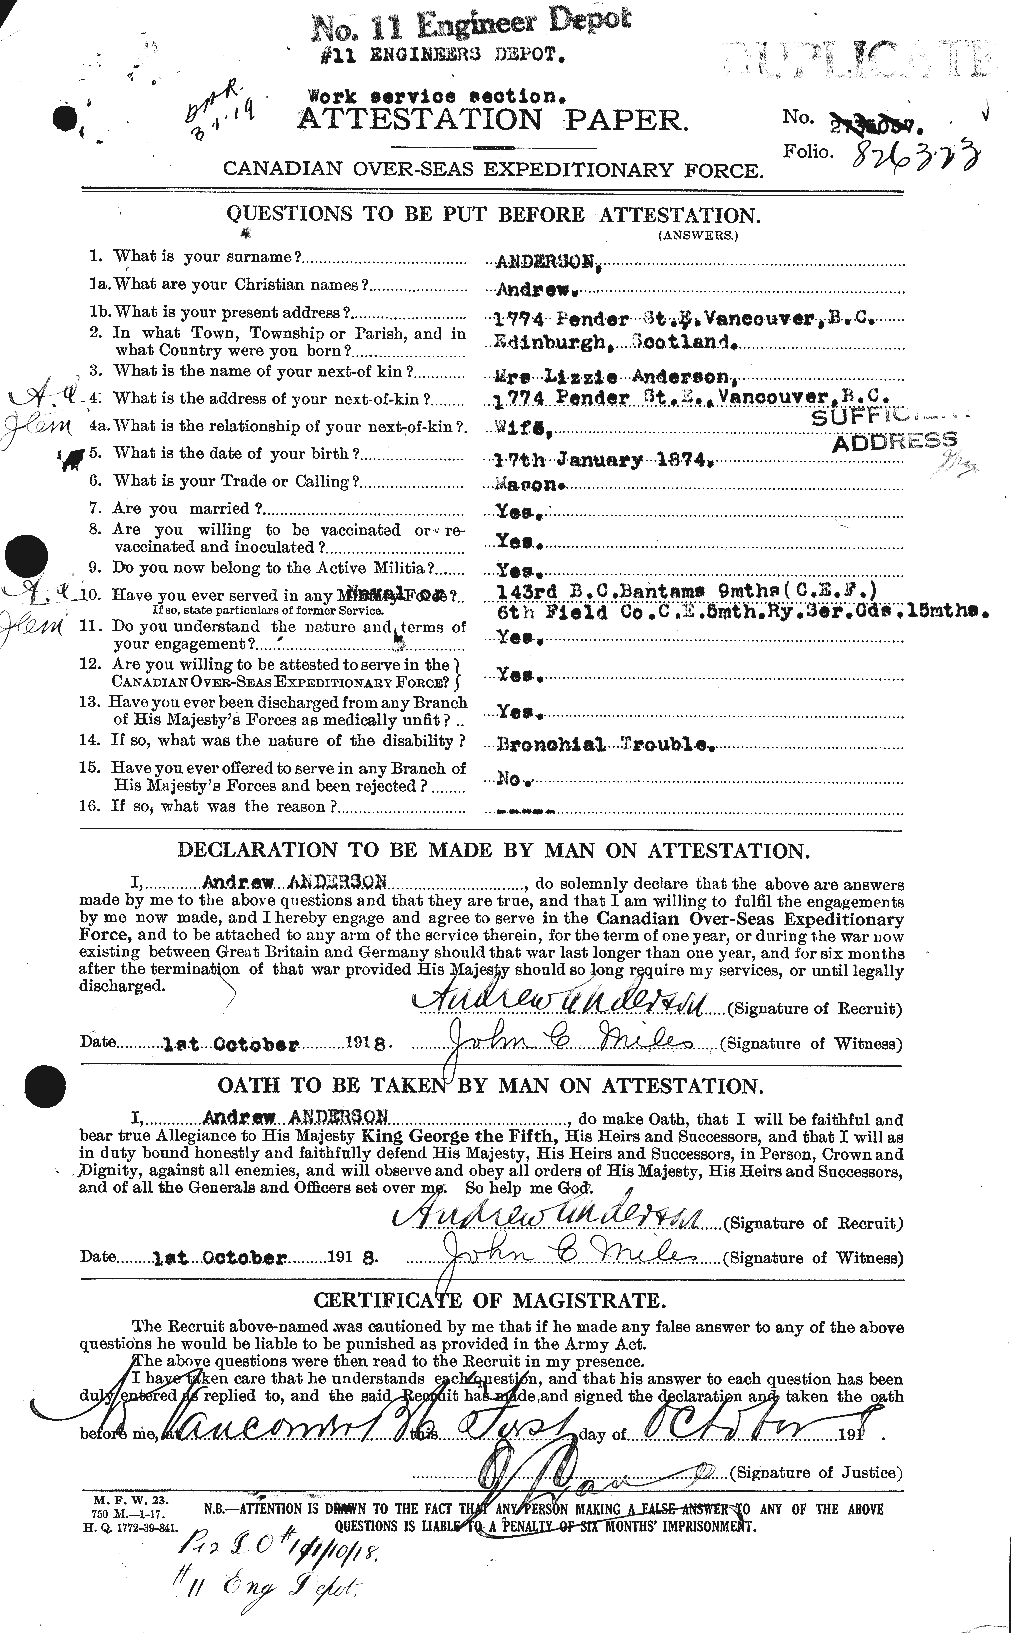 Personnel Records of the First World War - CEF 209422a